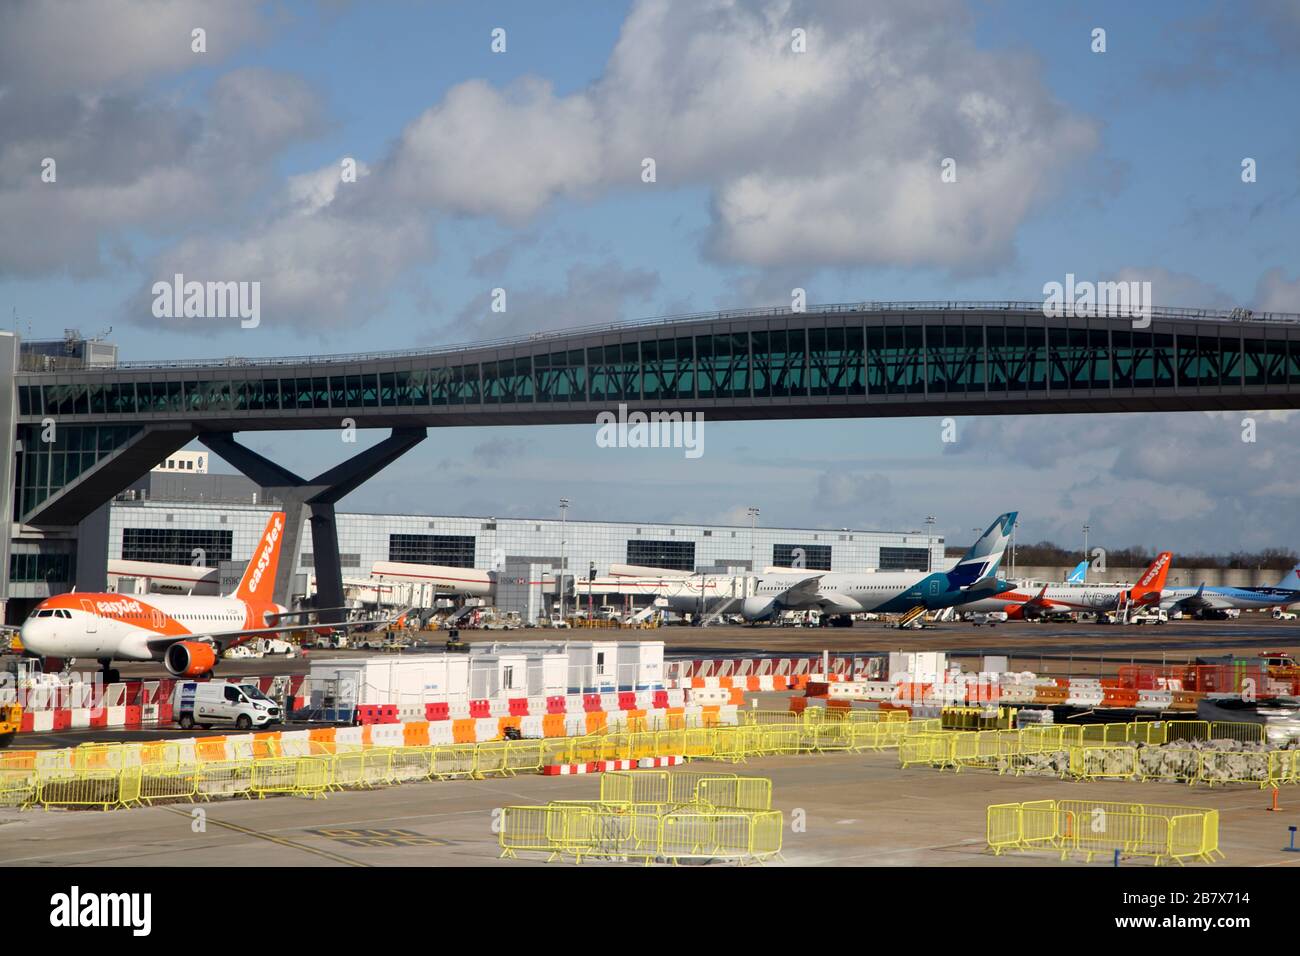 Gatwick Airport England Air Bridge Connecting North Terminal to Pier 6 Stock Photo